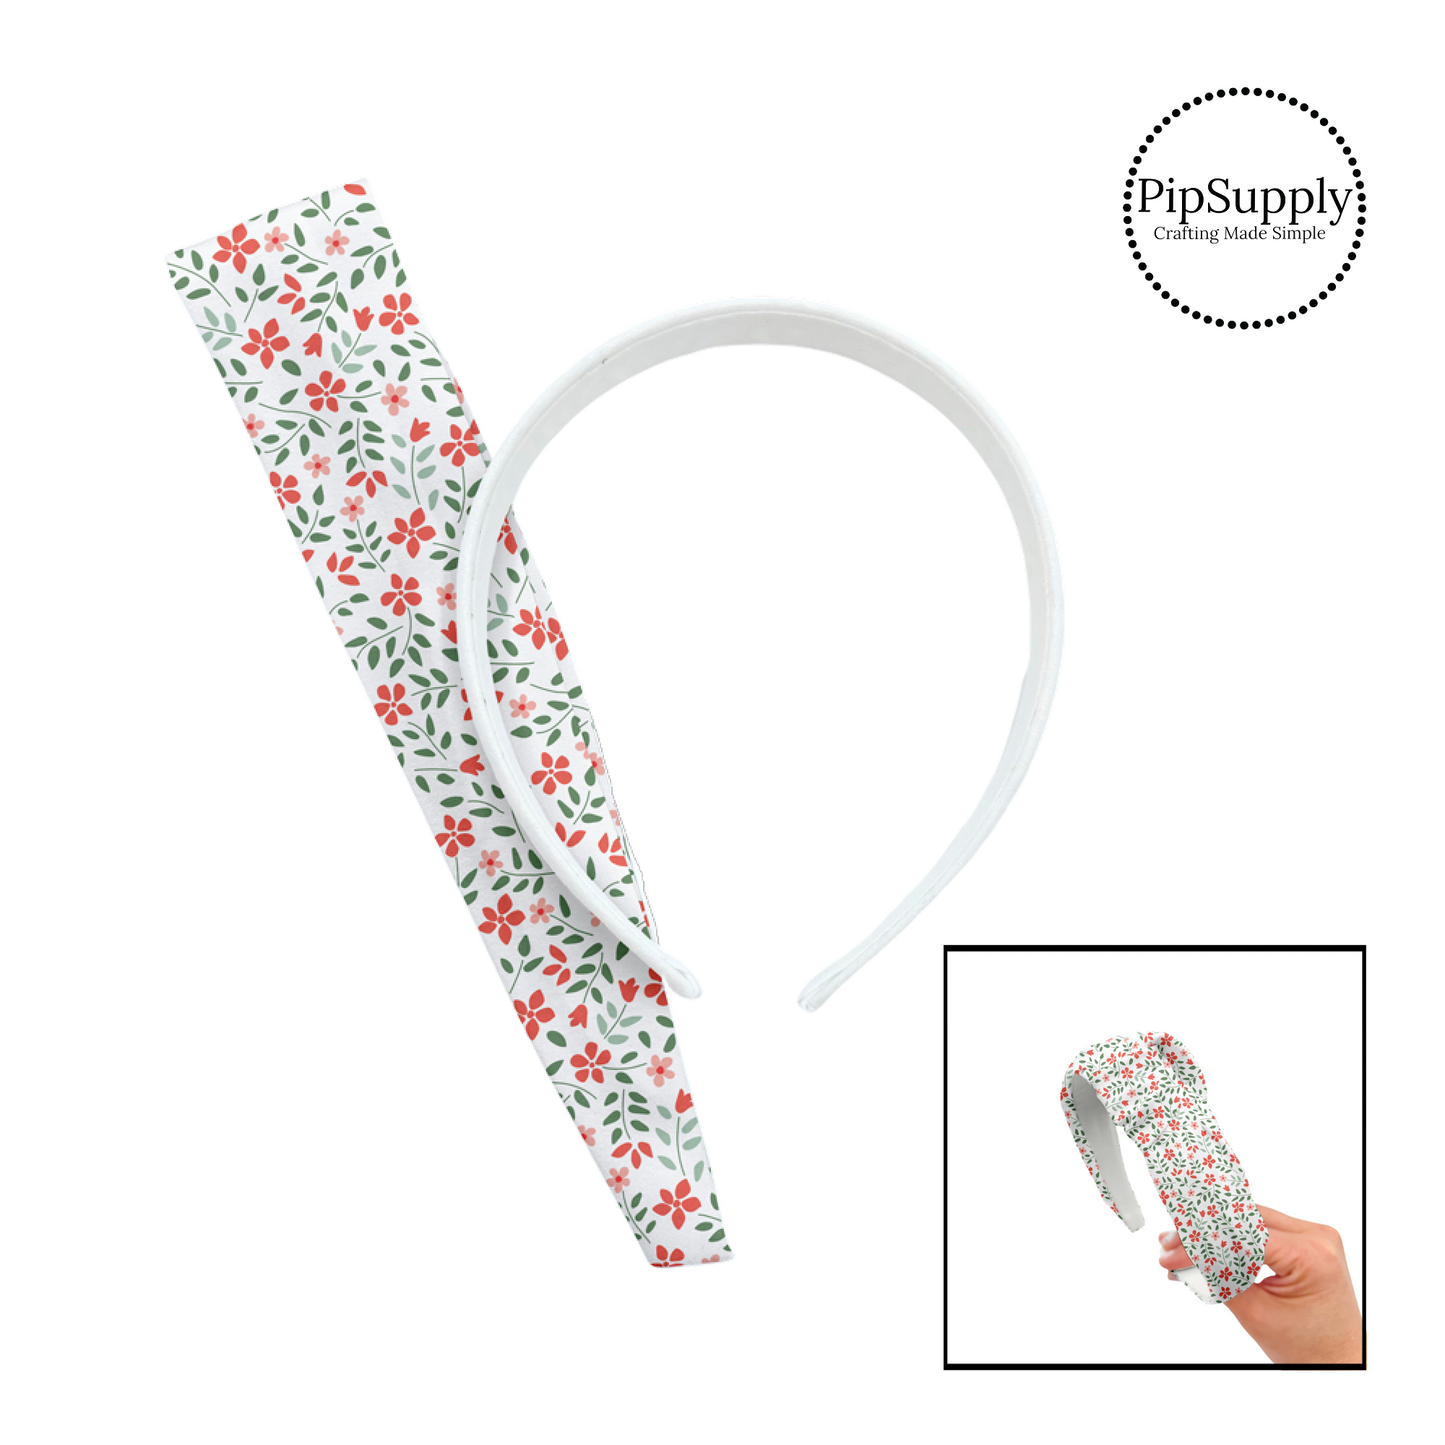 Red and green with pink flowers on white knotted headband kit